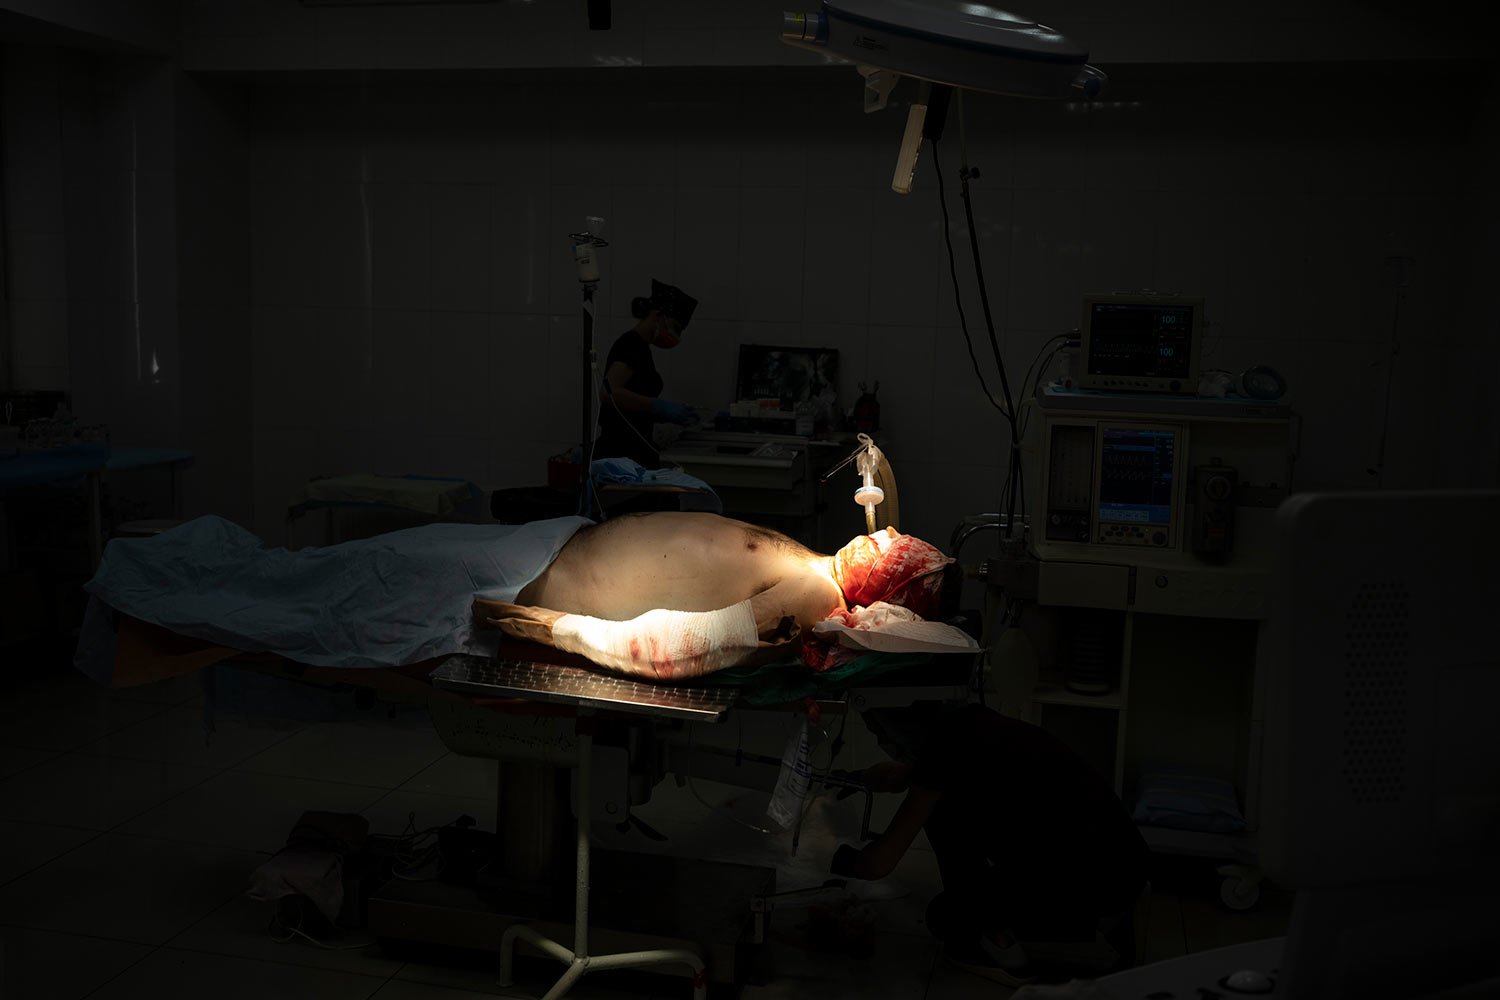  A Ukrainian soldier lies on the operating table  before surgery after being injured as Russian attacks continue in Kharkiv, Ukraine, Friday, March 25, 2022. (AP Photo/Felipe Dana)  